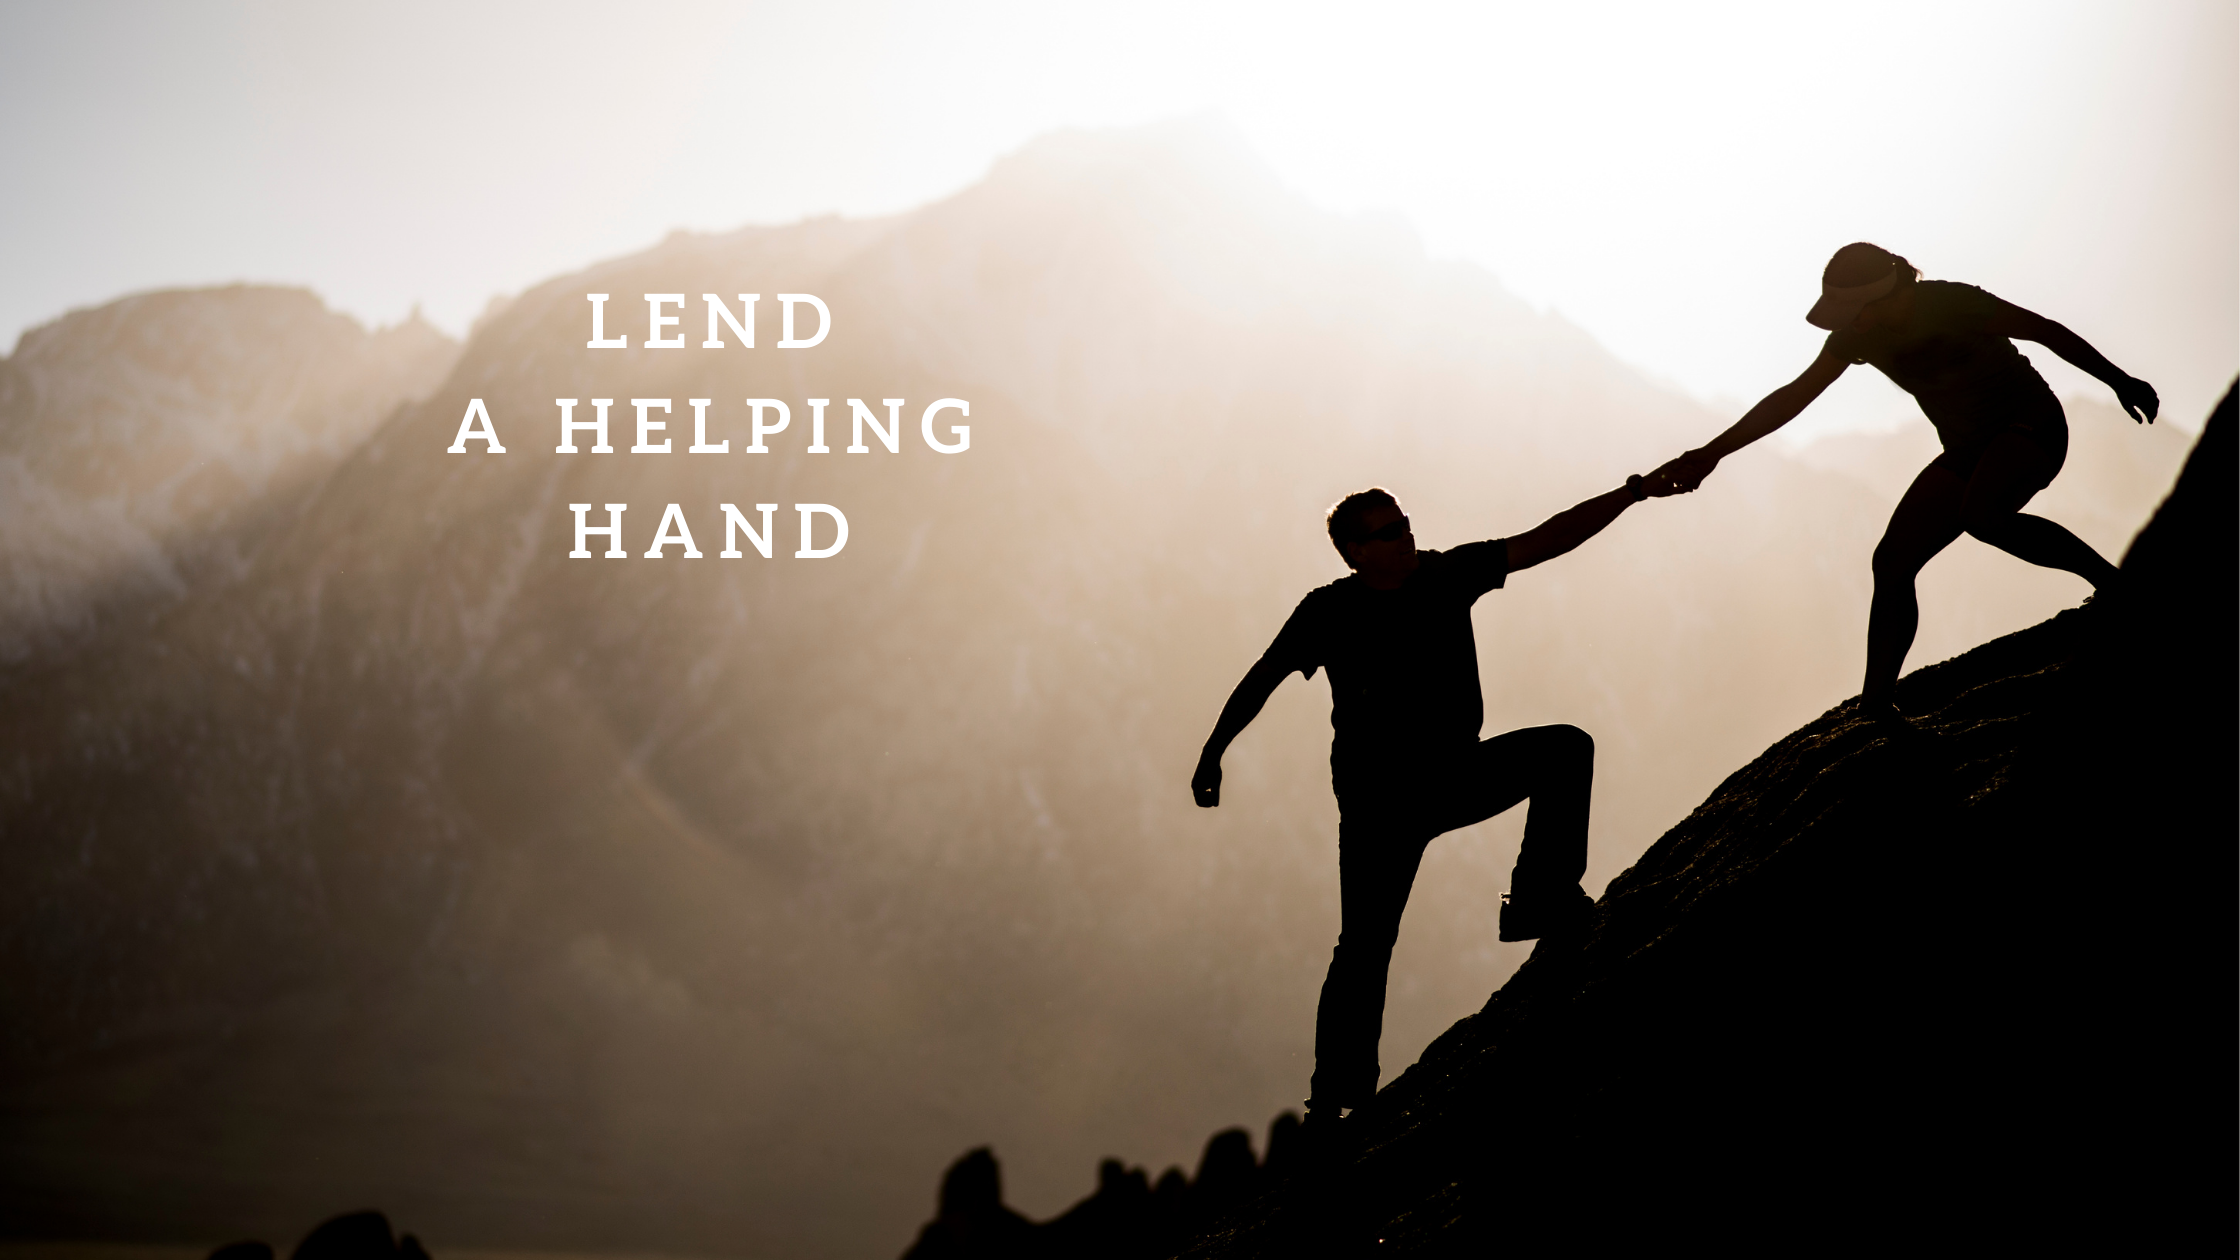 https://techcyclesolutions.com/wp-content/uploads/2021/06/Lend-a-helping-hand-4.png